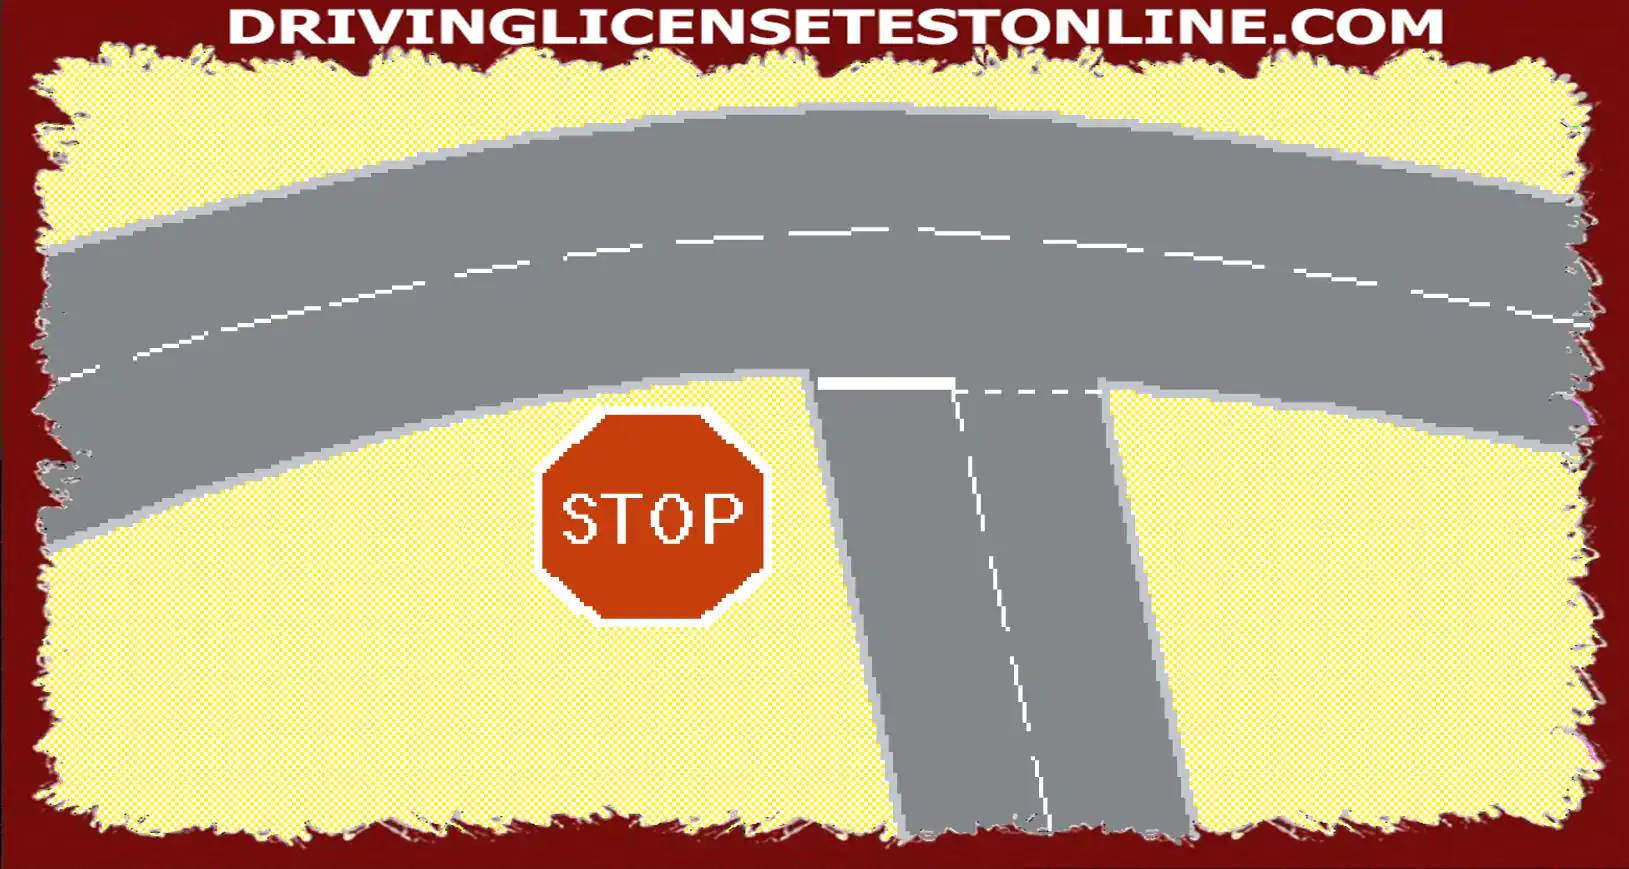 At this intersection, there is a stop sign and a solid white line on the road surface. Why is...